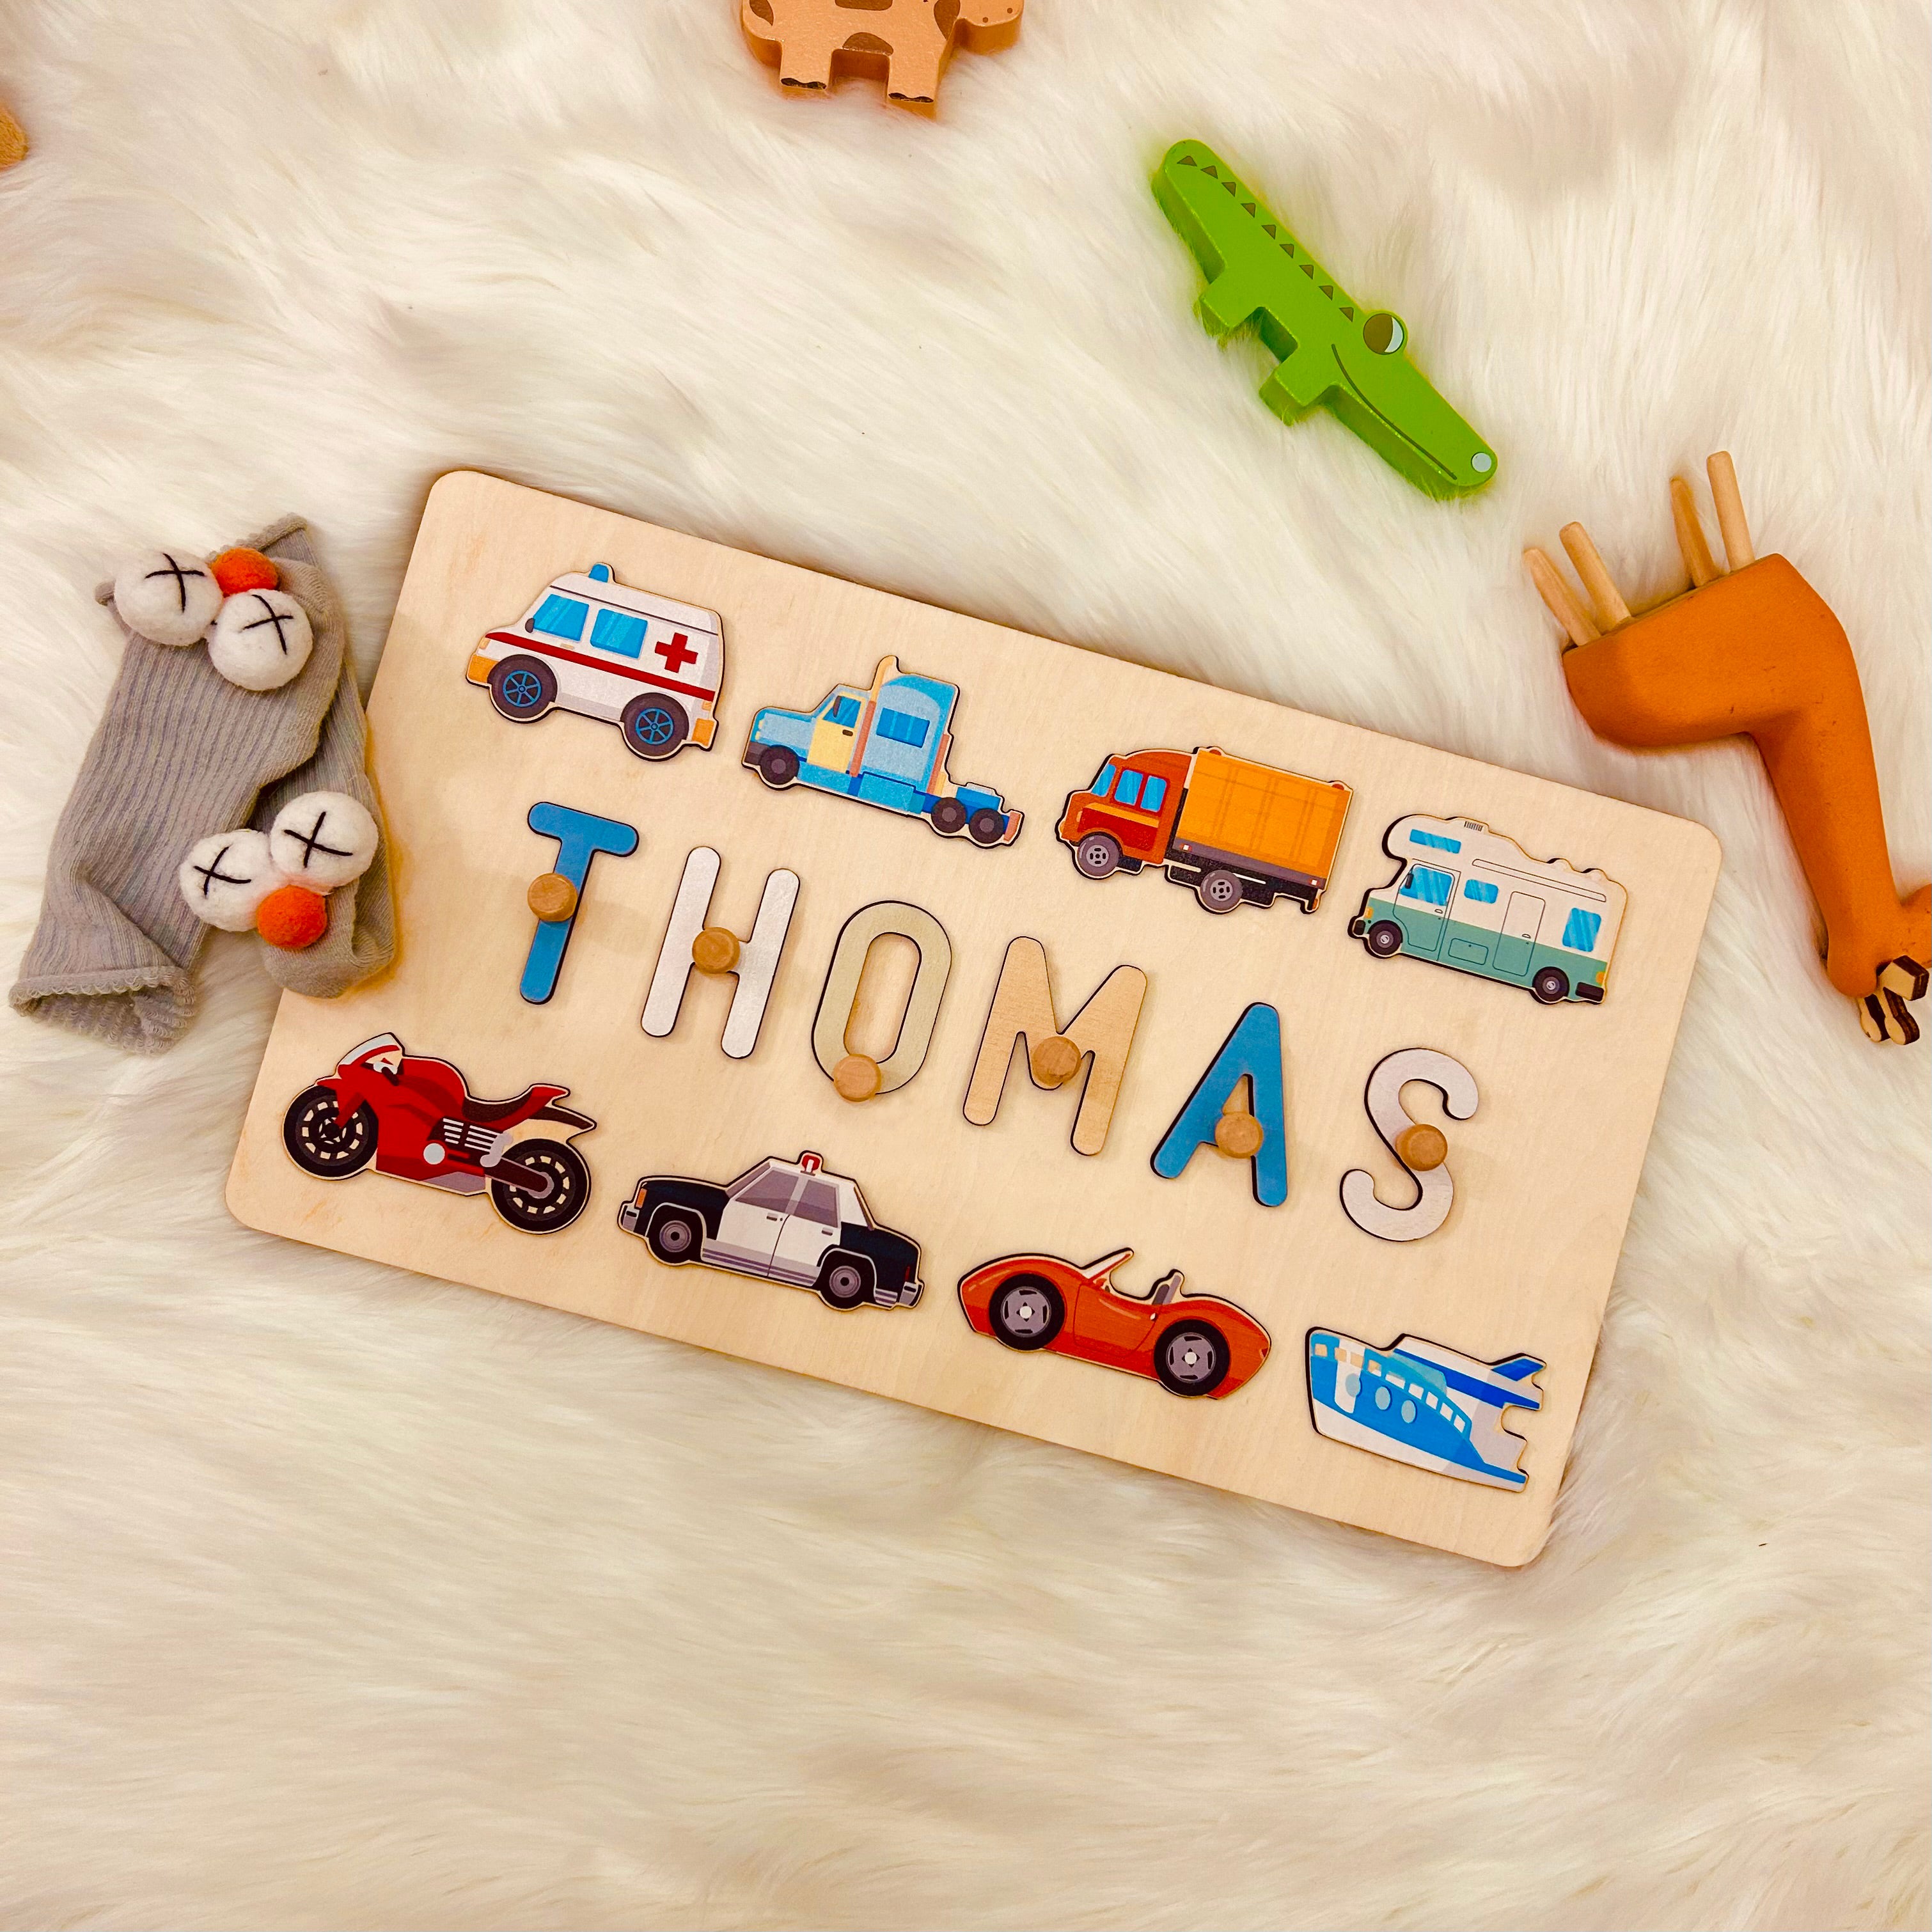 8 Traffic Element Name Puzzle - Birthday Gift for Baby